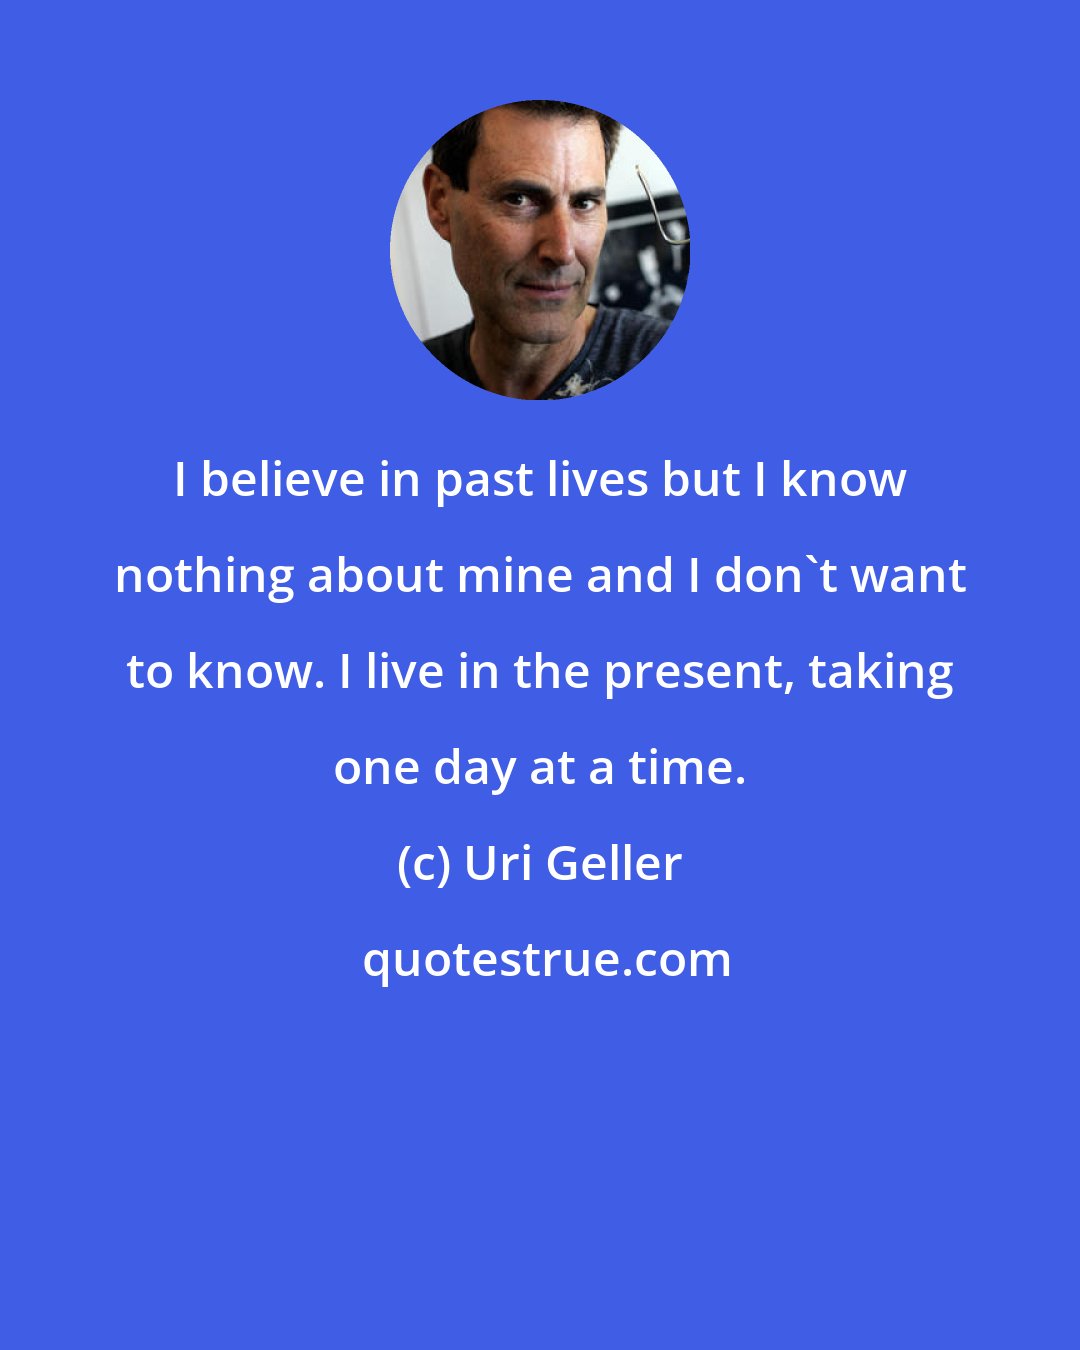 Uri Geller: I believe in past lives but I know nothing about mine and I don't want to know. I live in the present, taking one day at a time.